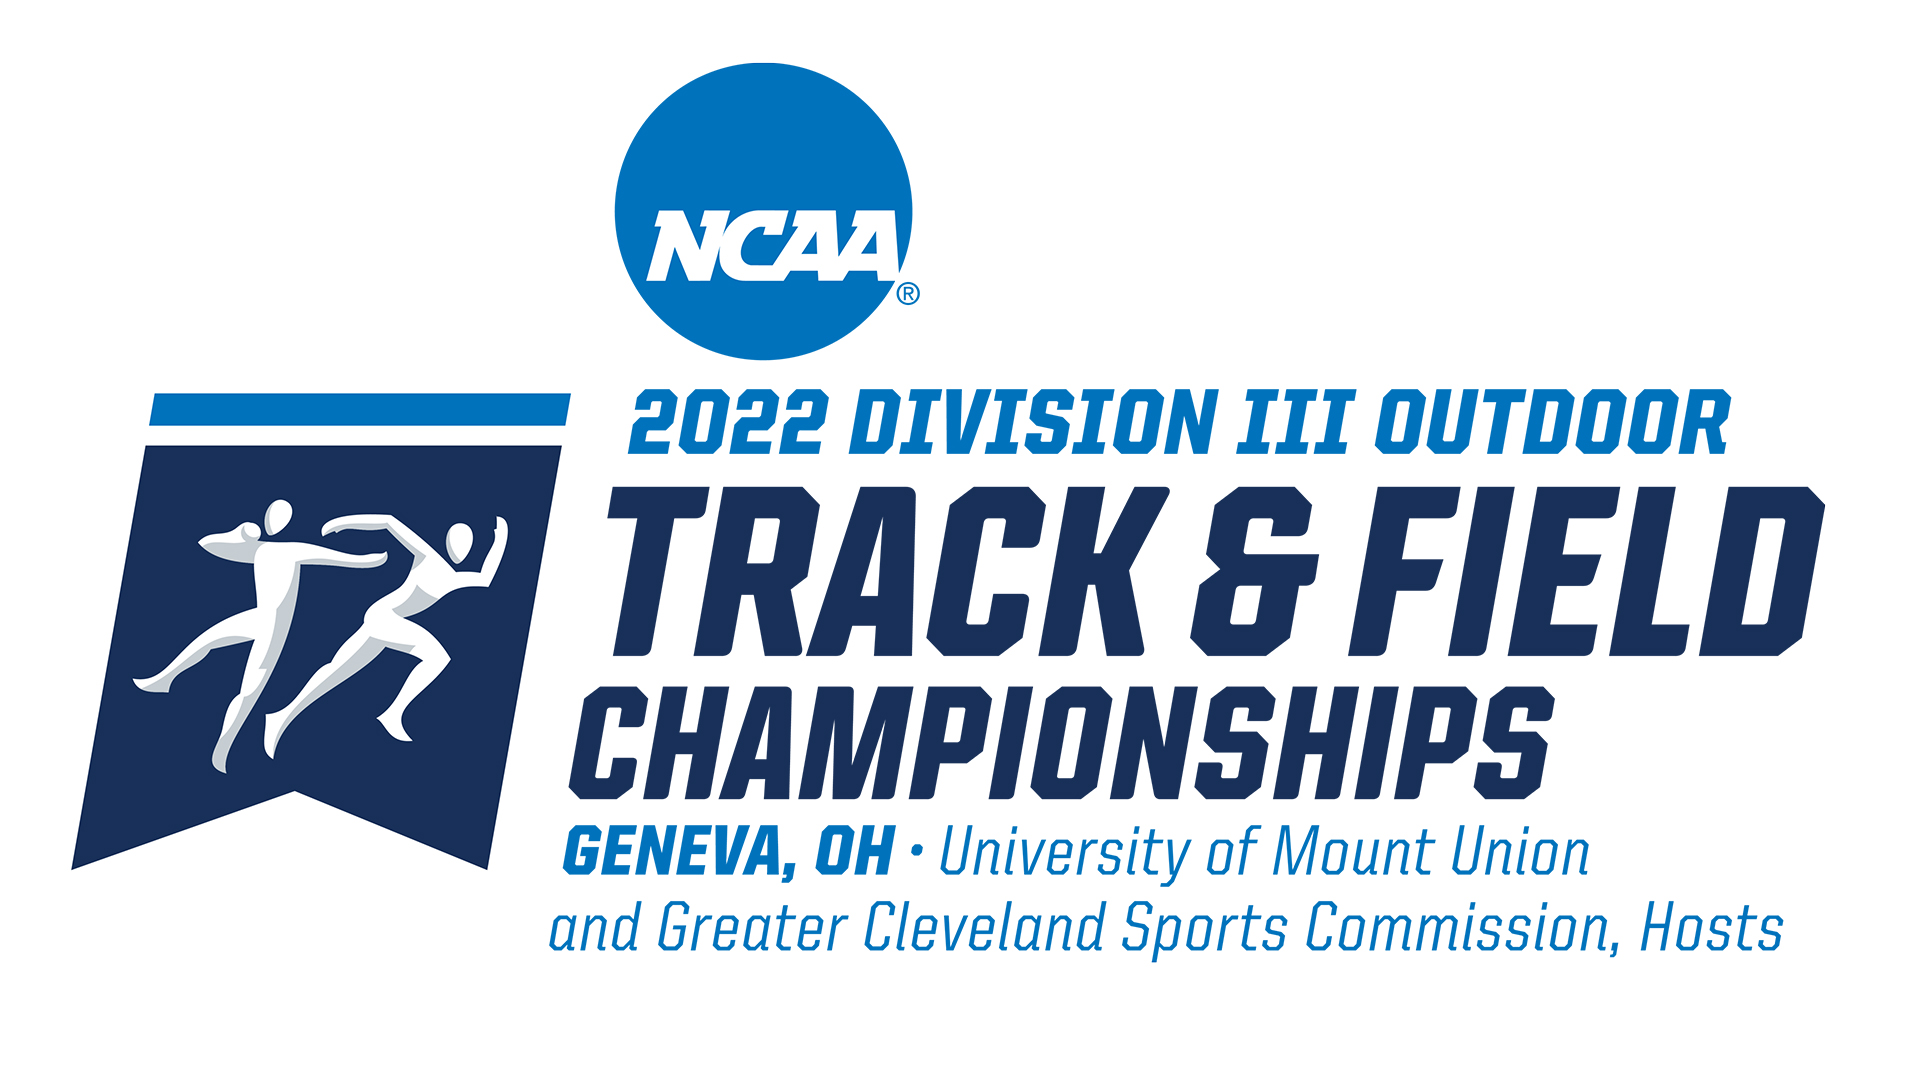 20 Individuals, One Relay Headed to NCAA Outdoor Track & Field Championships